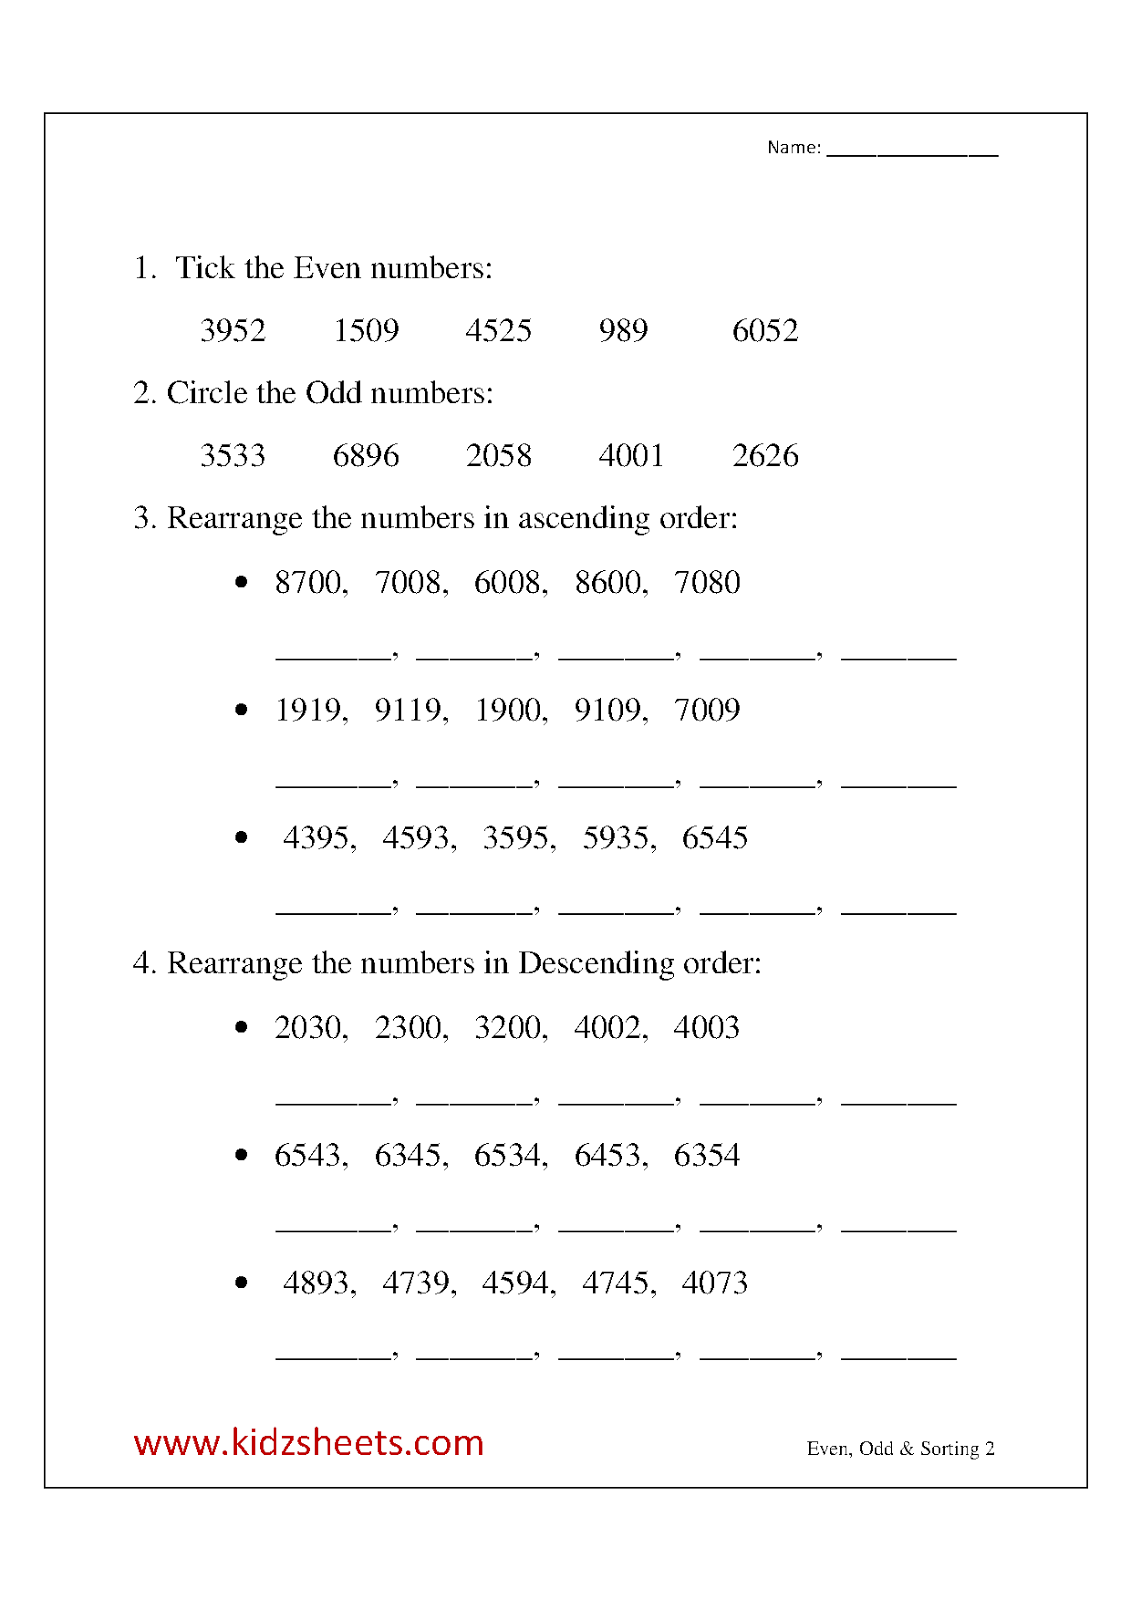 11-best-images-of-even-and-odd-numbers-worksheets-odd-and-even-numbers-1-100-worksheet